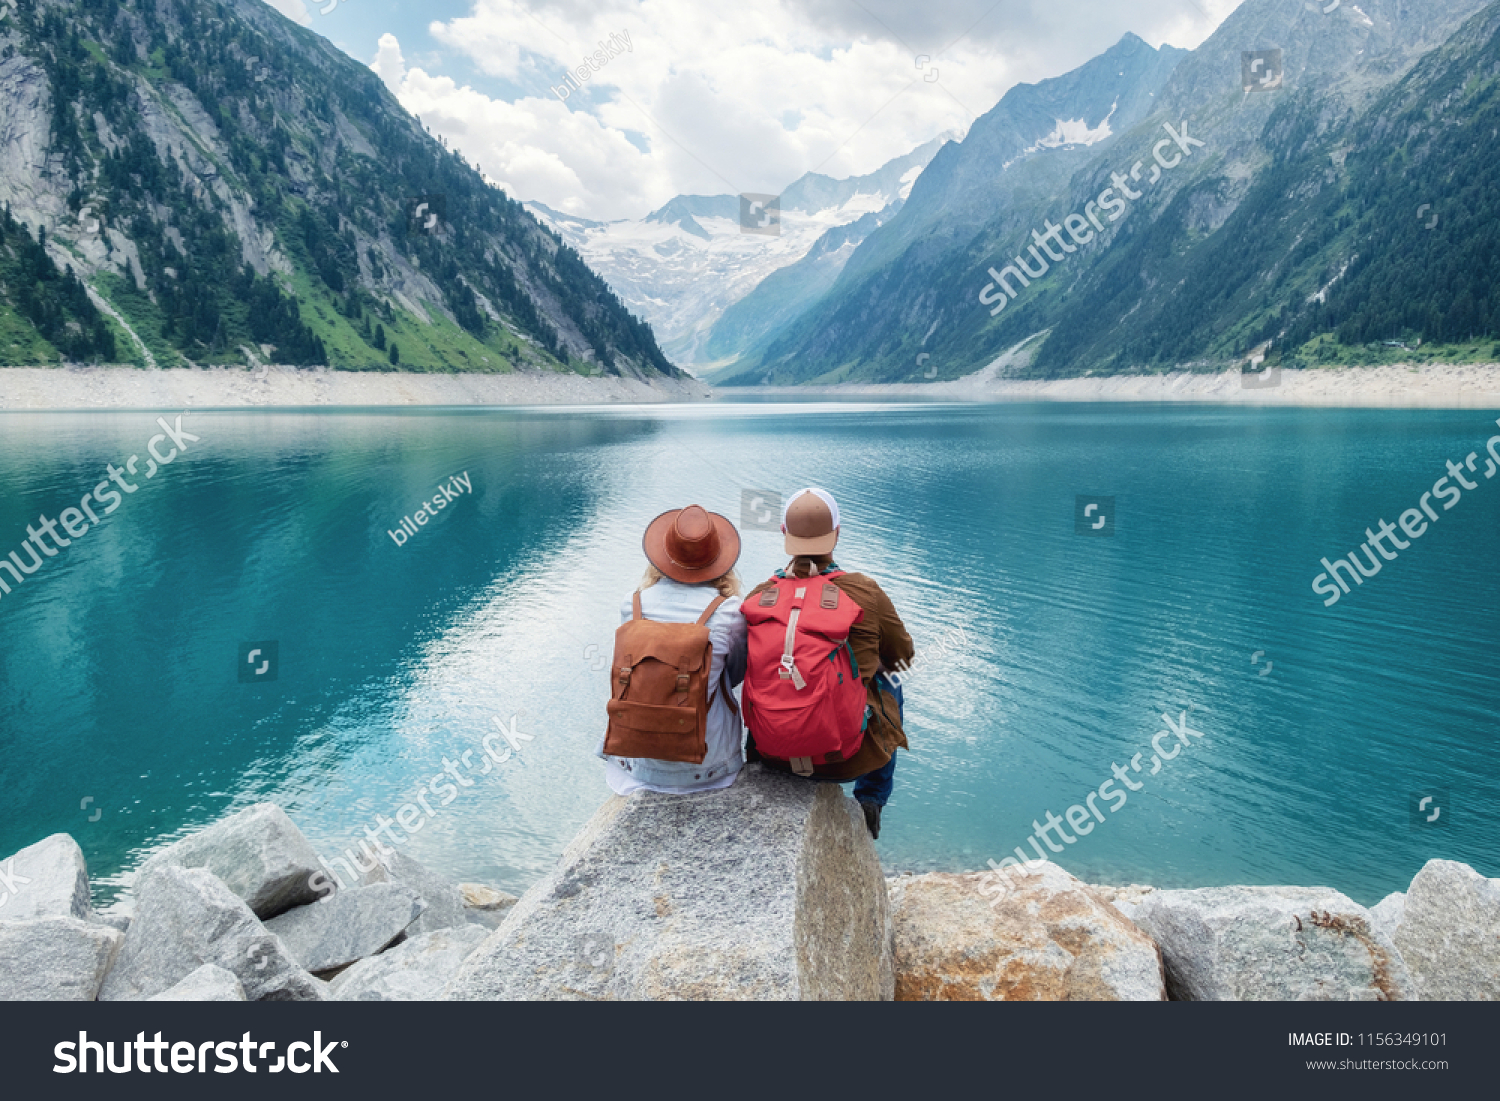 Travelers couple look at the mountain lake. Travel and active life concept with team. Adventure and travel in the mountains region in the Austria #1156349101